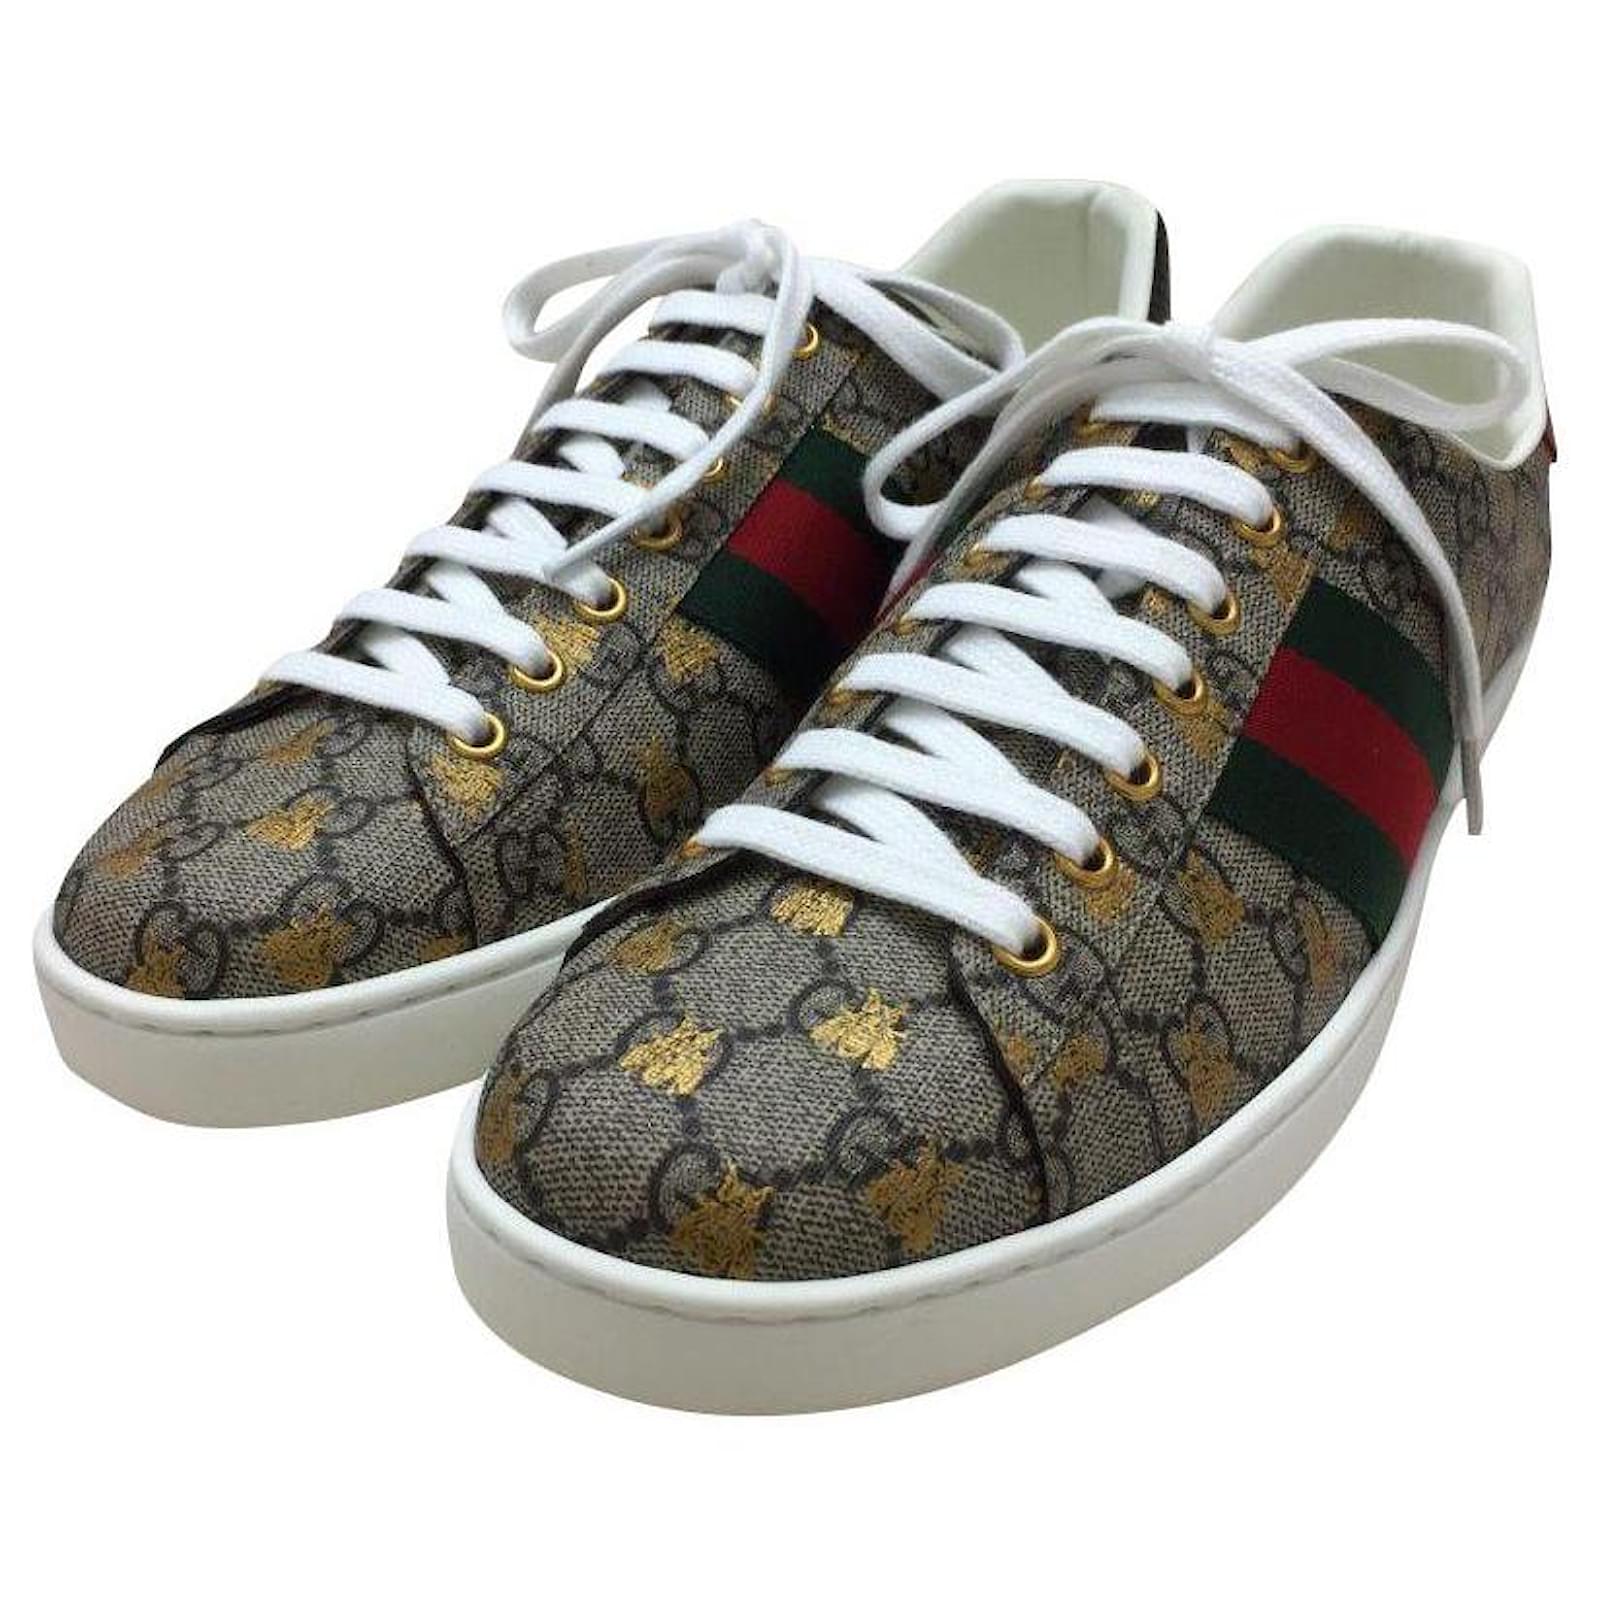 GUCCI GG Supreme with Ace Bee / Low-cut sneakers / UK10 / 548950